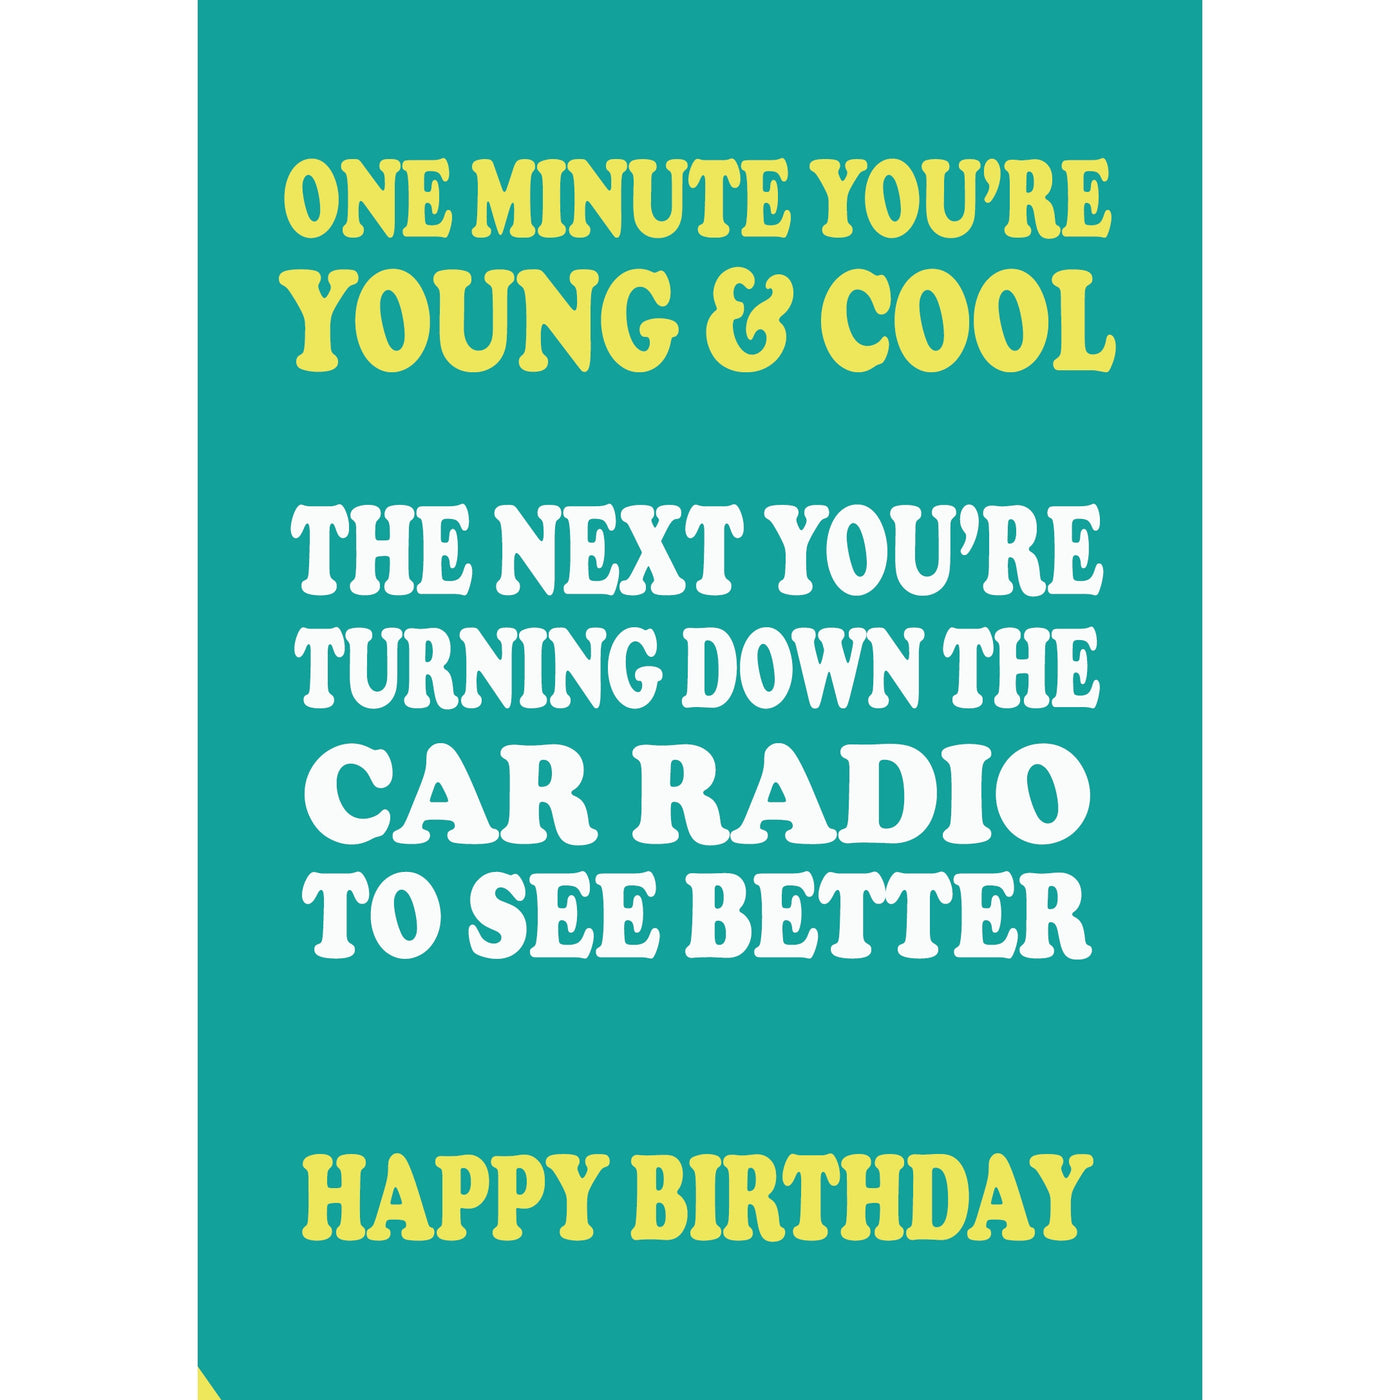 One Minute You're Young & Cool Birthday Card